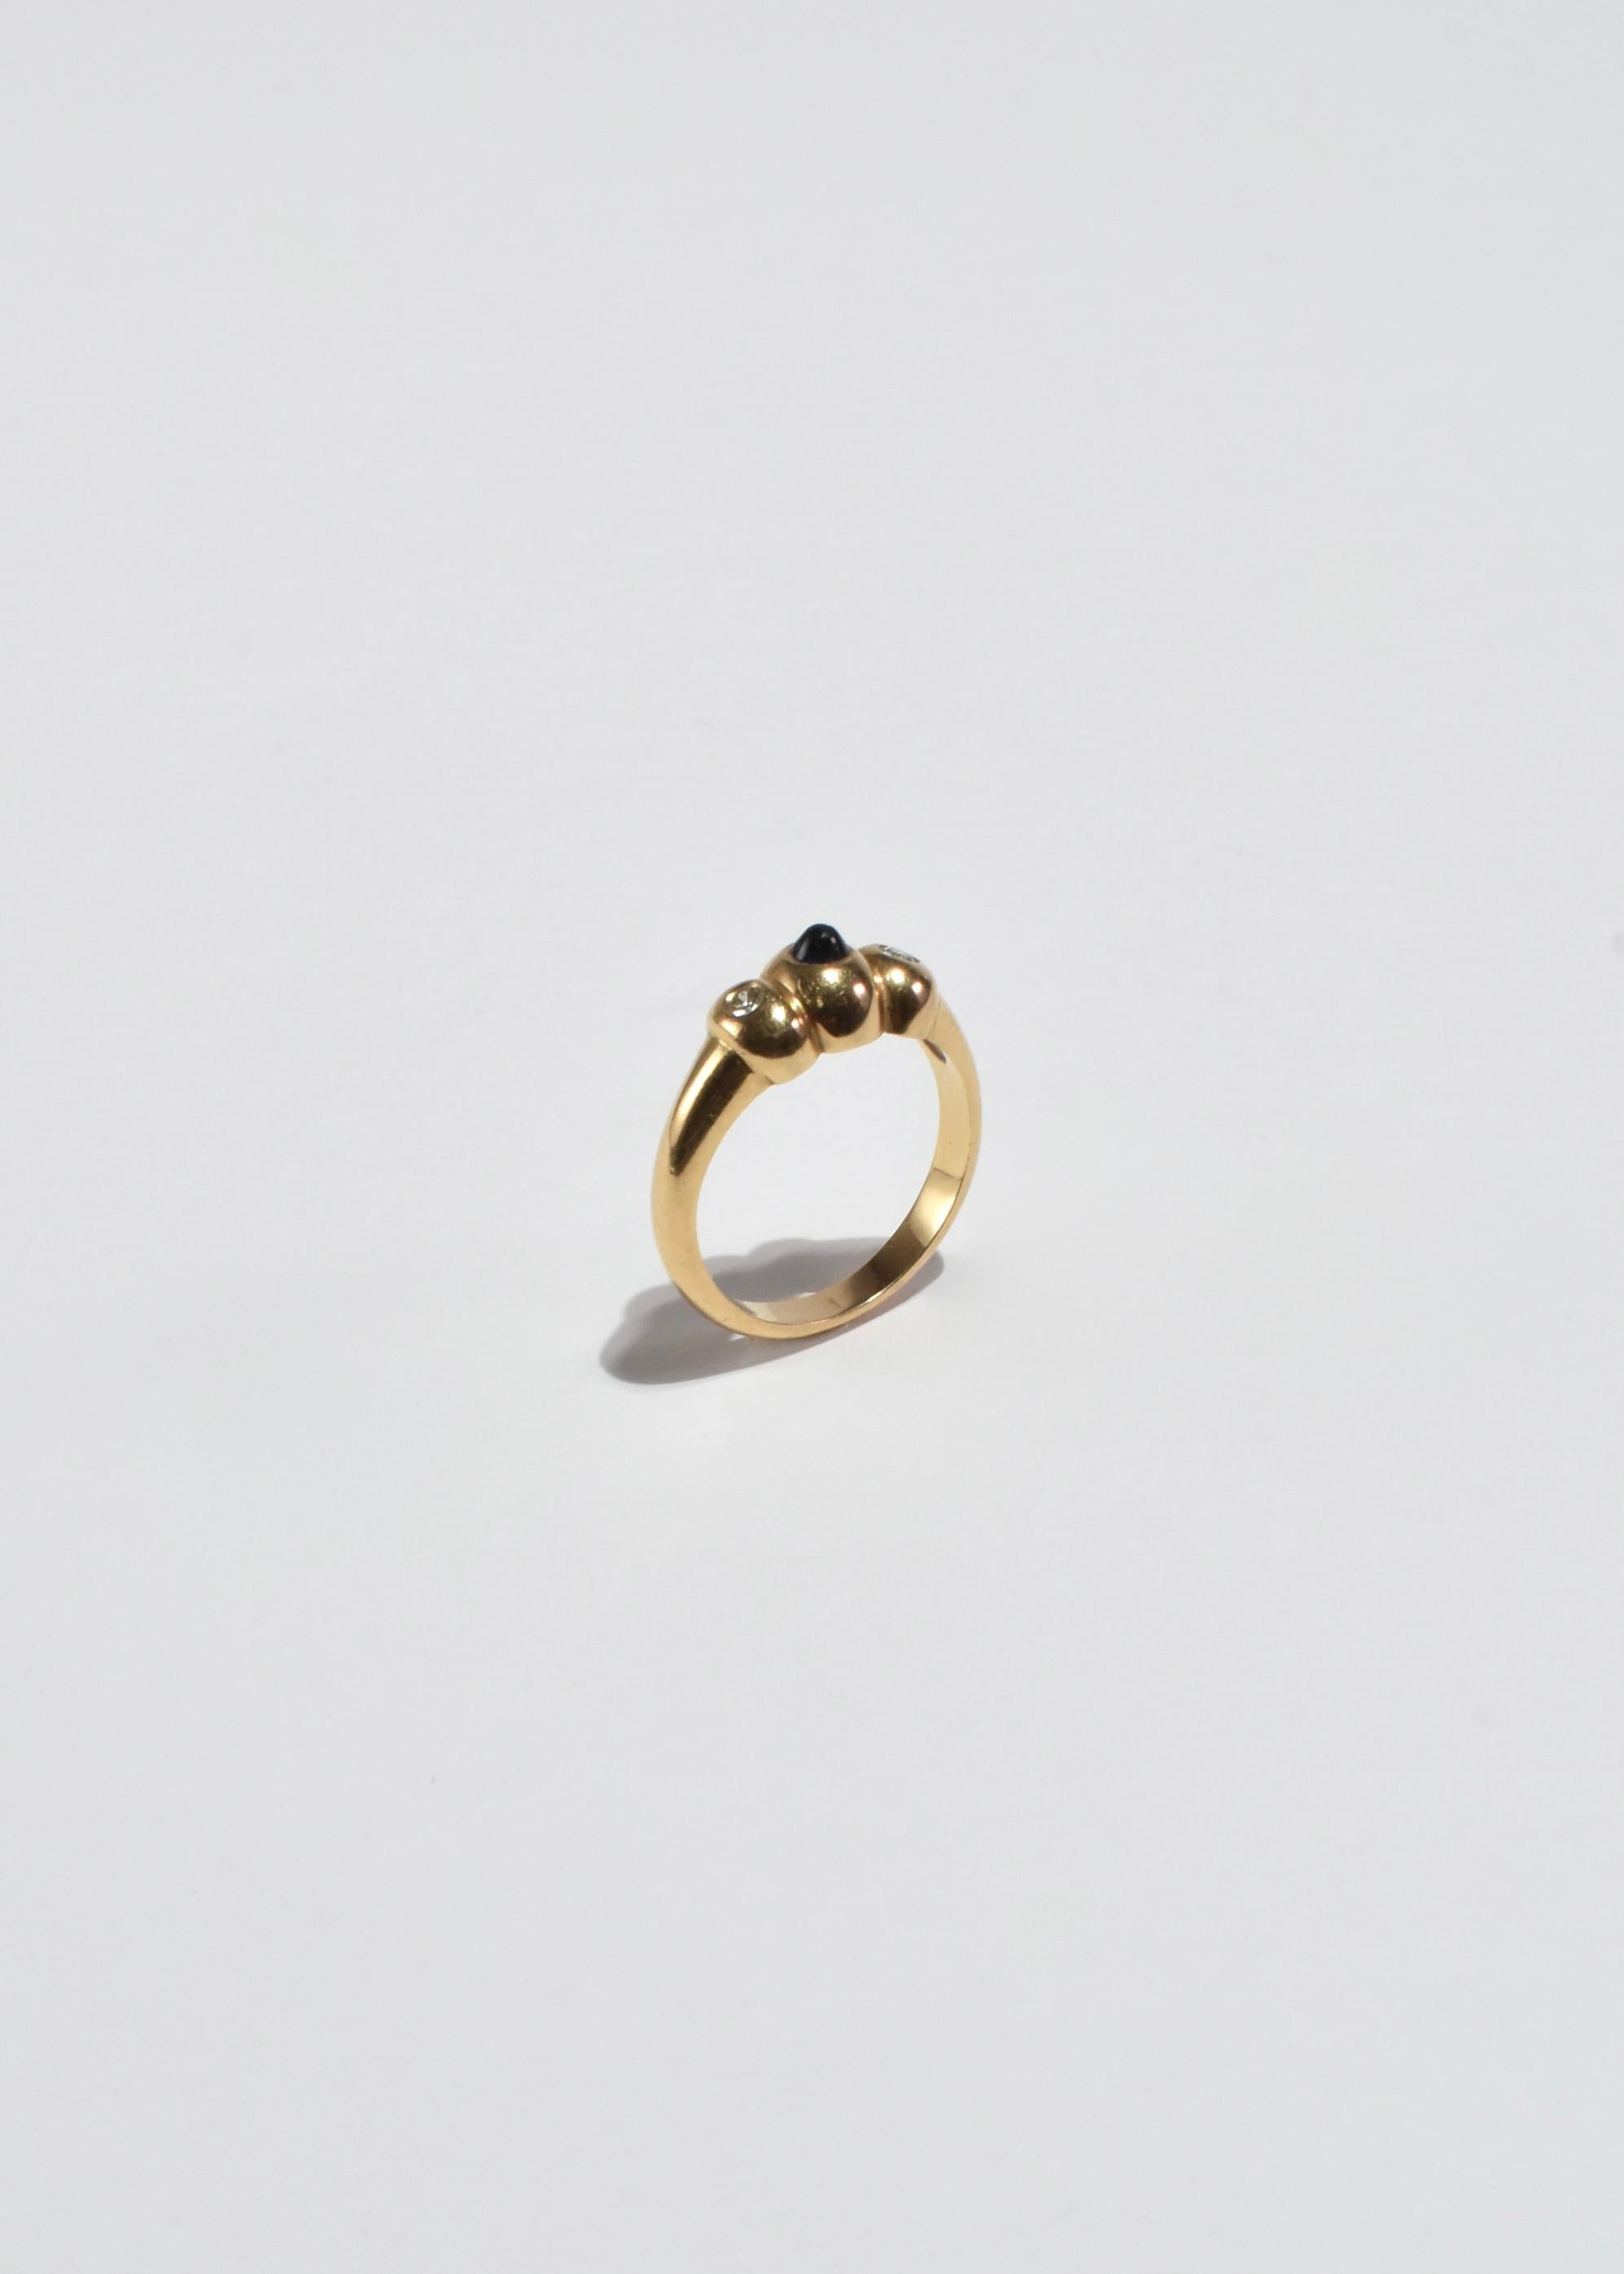 Stunning vintage gold ring with sapphire and diamond stones. Stamped 14k.

Material: 14k gold, sapphire, diamond.